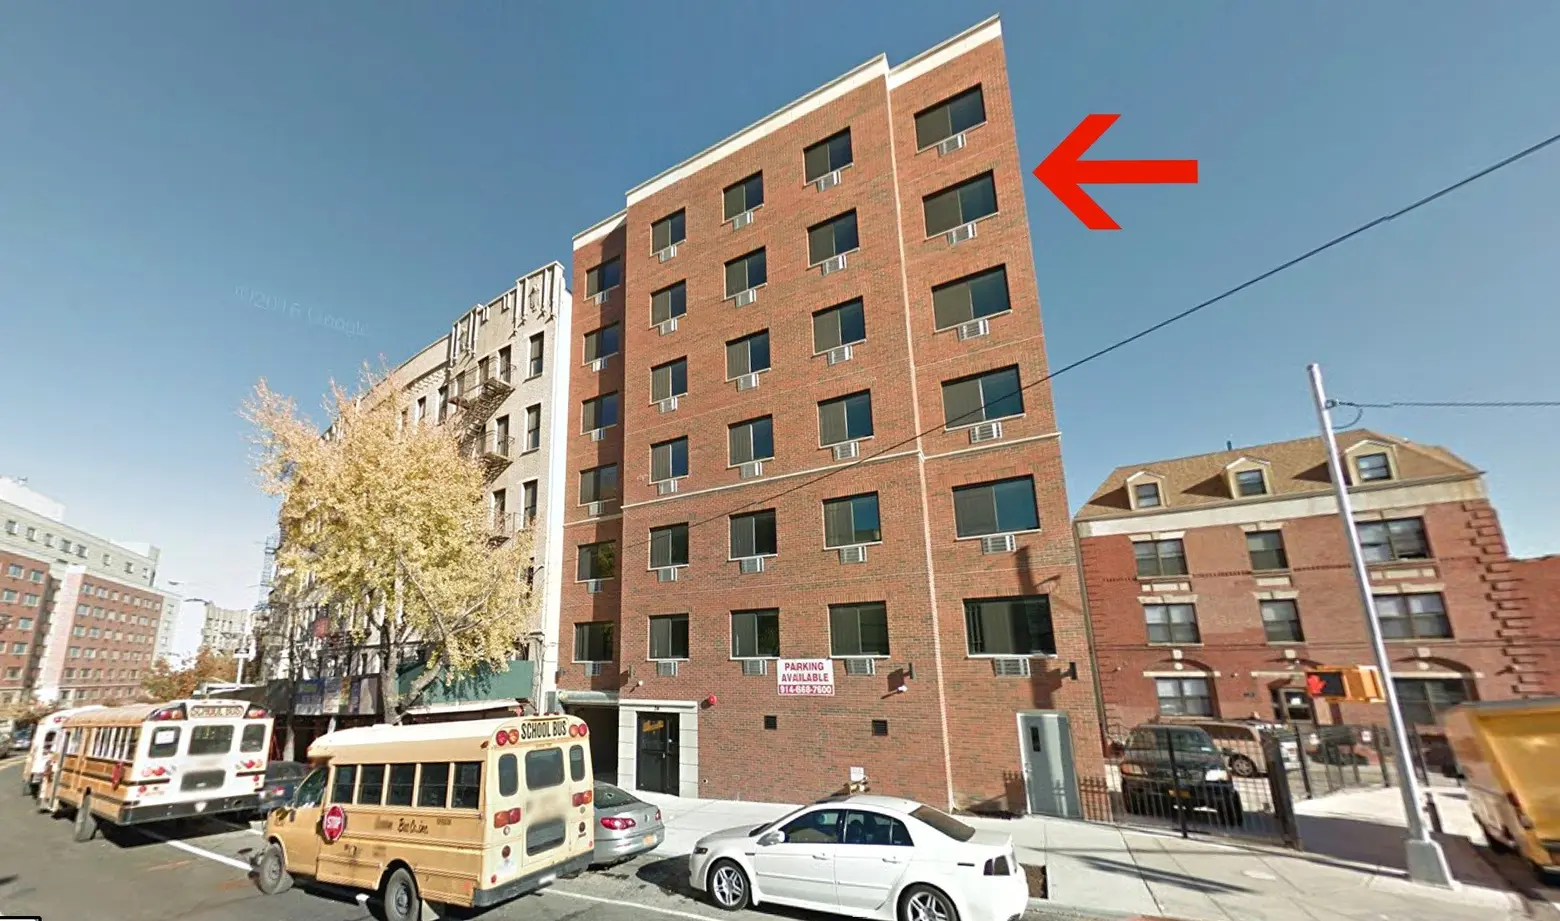 Apply for seven affordable units in the Bronx’s Morris Heights area, starting at $1,292/month